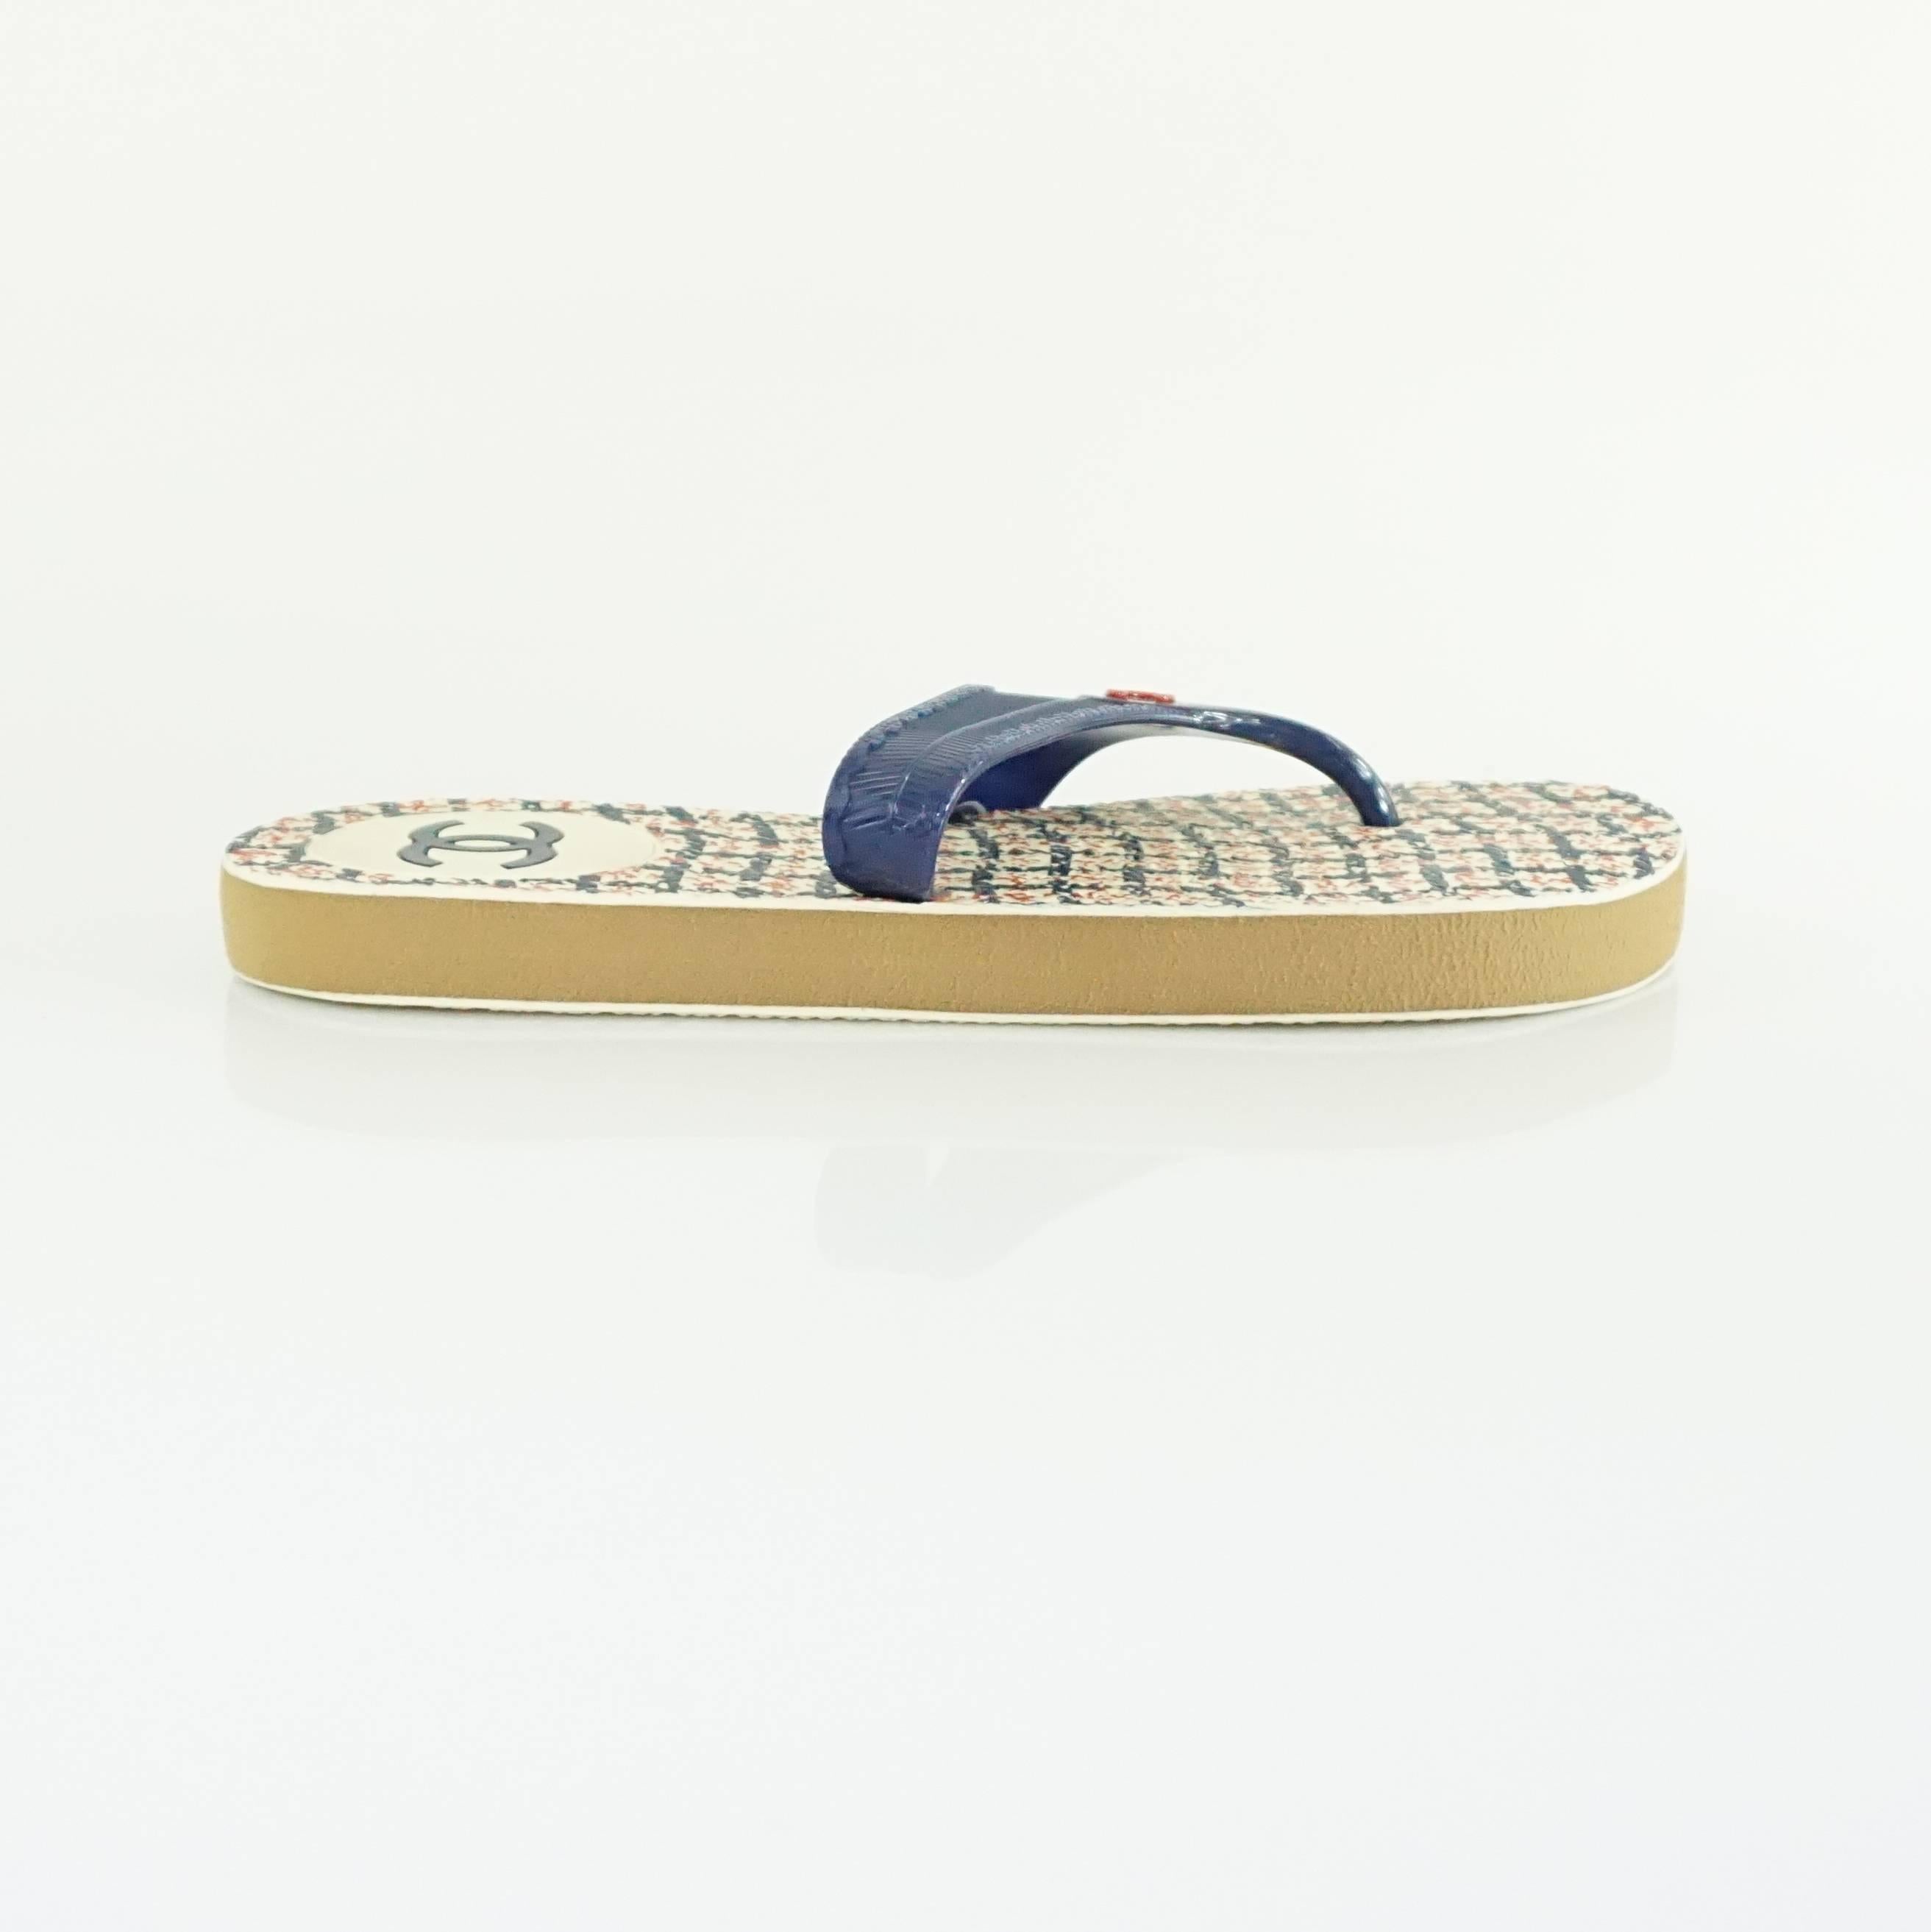 These Chanel rubber thong sandals are navy and red. On the strap, there is a red Chanel logo. They are in excellent condition.

Measurement
Platform height: .75"